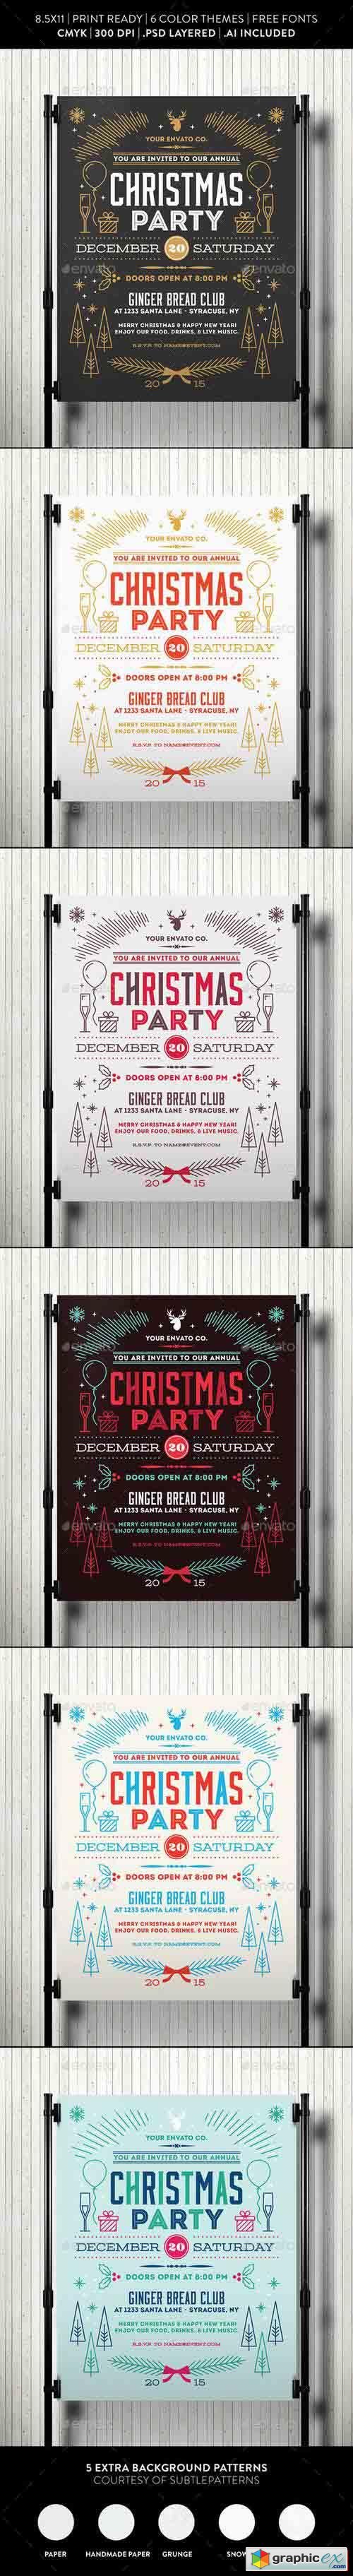 Christmas Party Flyer Template  9485861